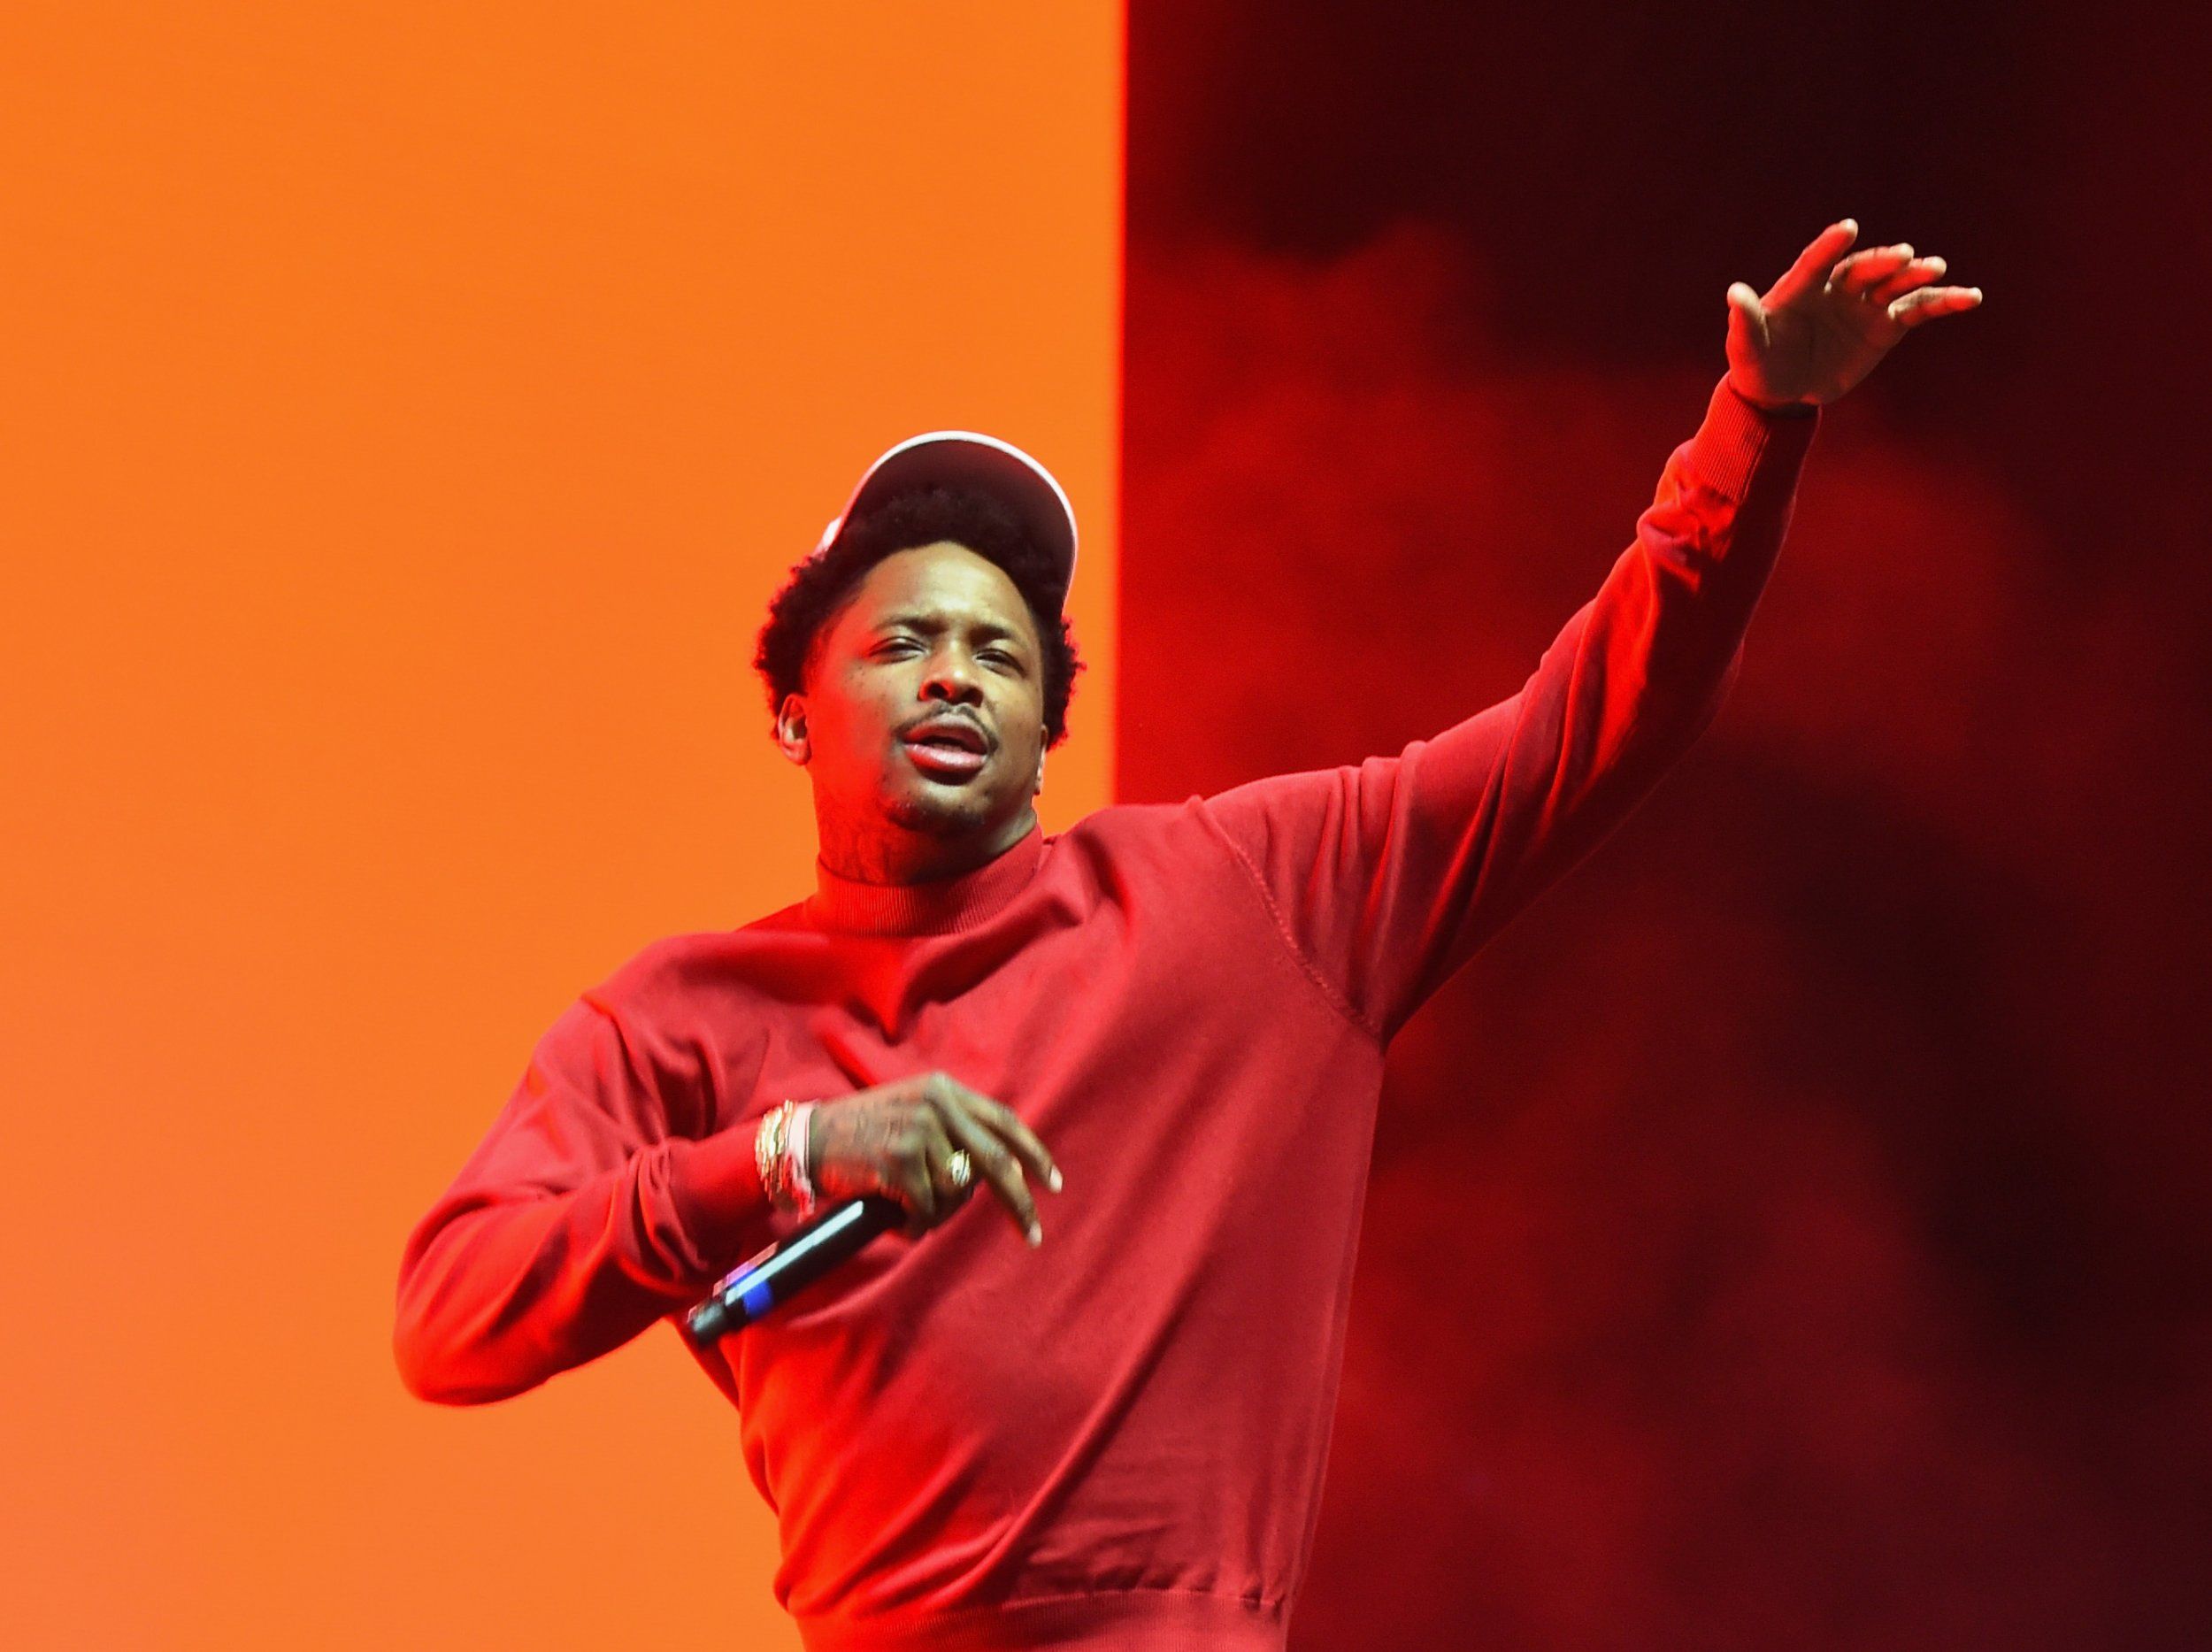 Rapper YG Faces Lawsuit for Allegedly Robbing, Assaulting Fan in Vegas